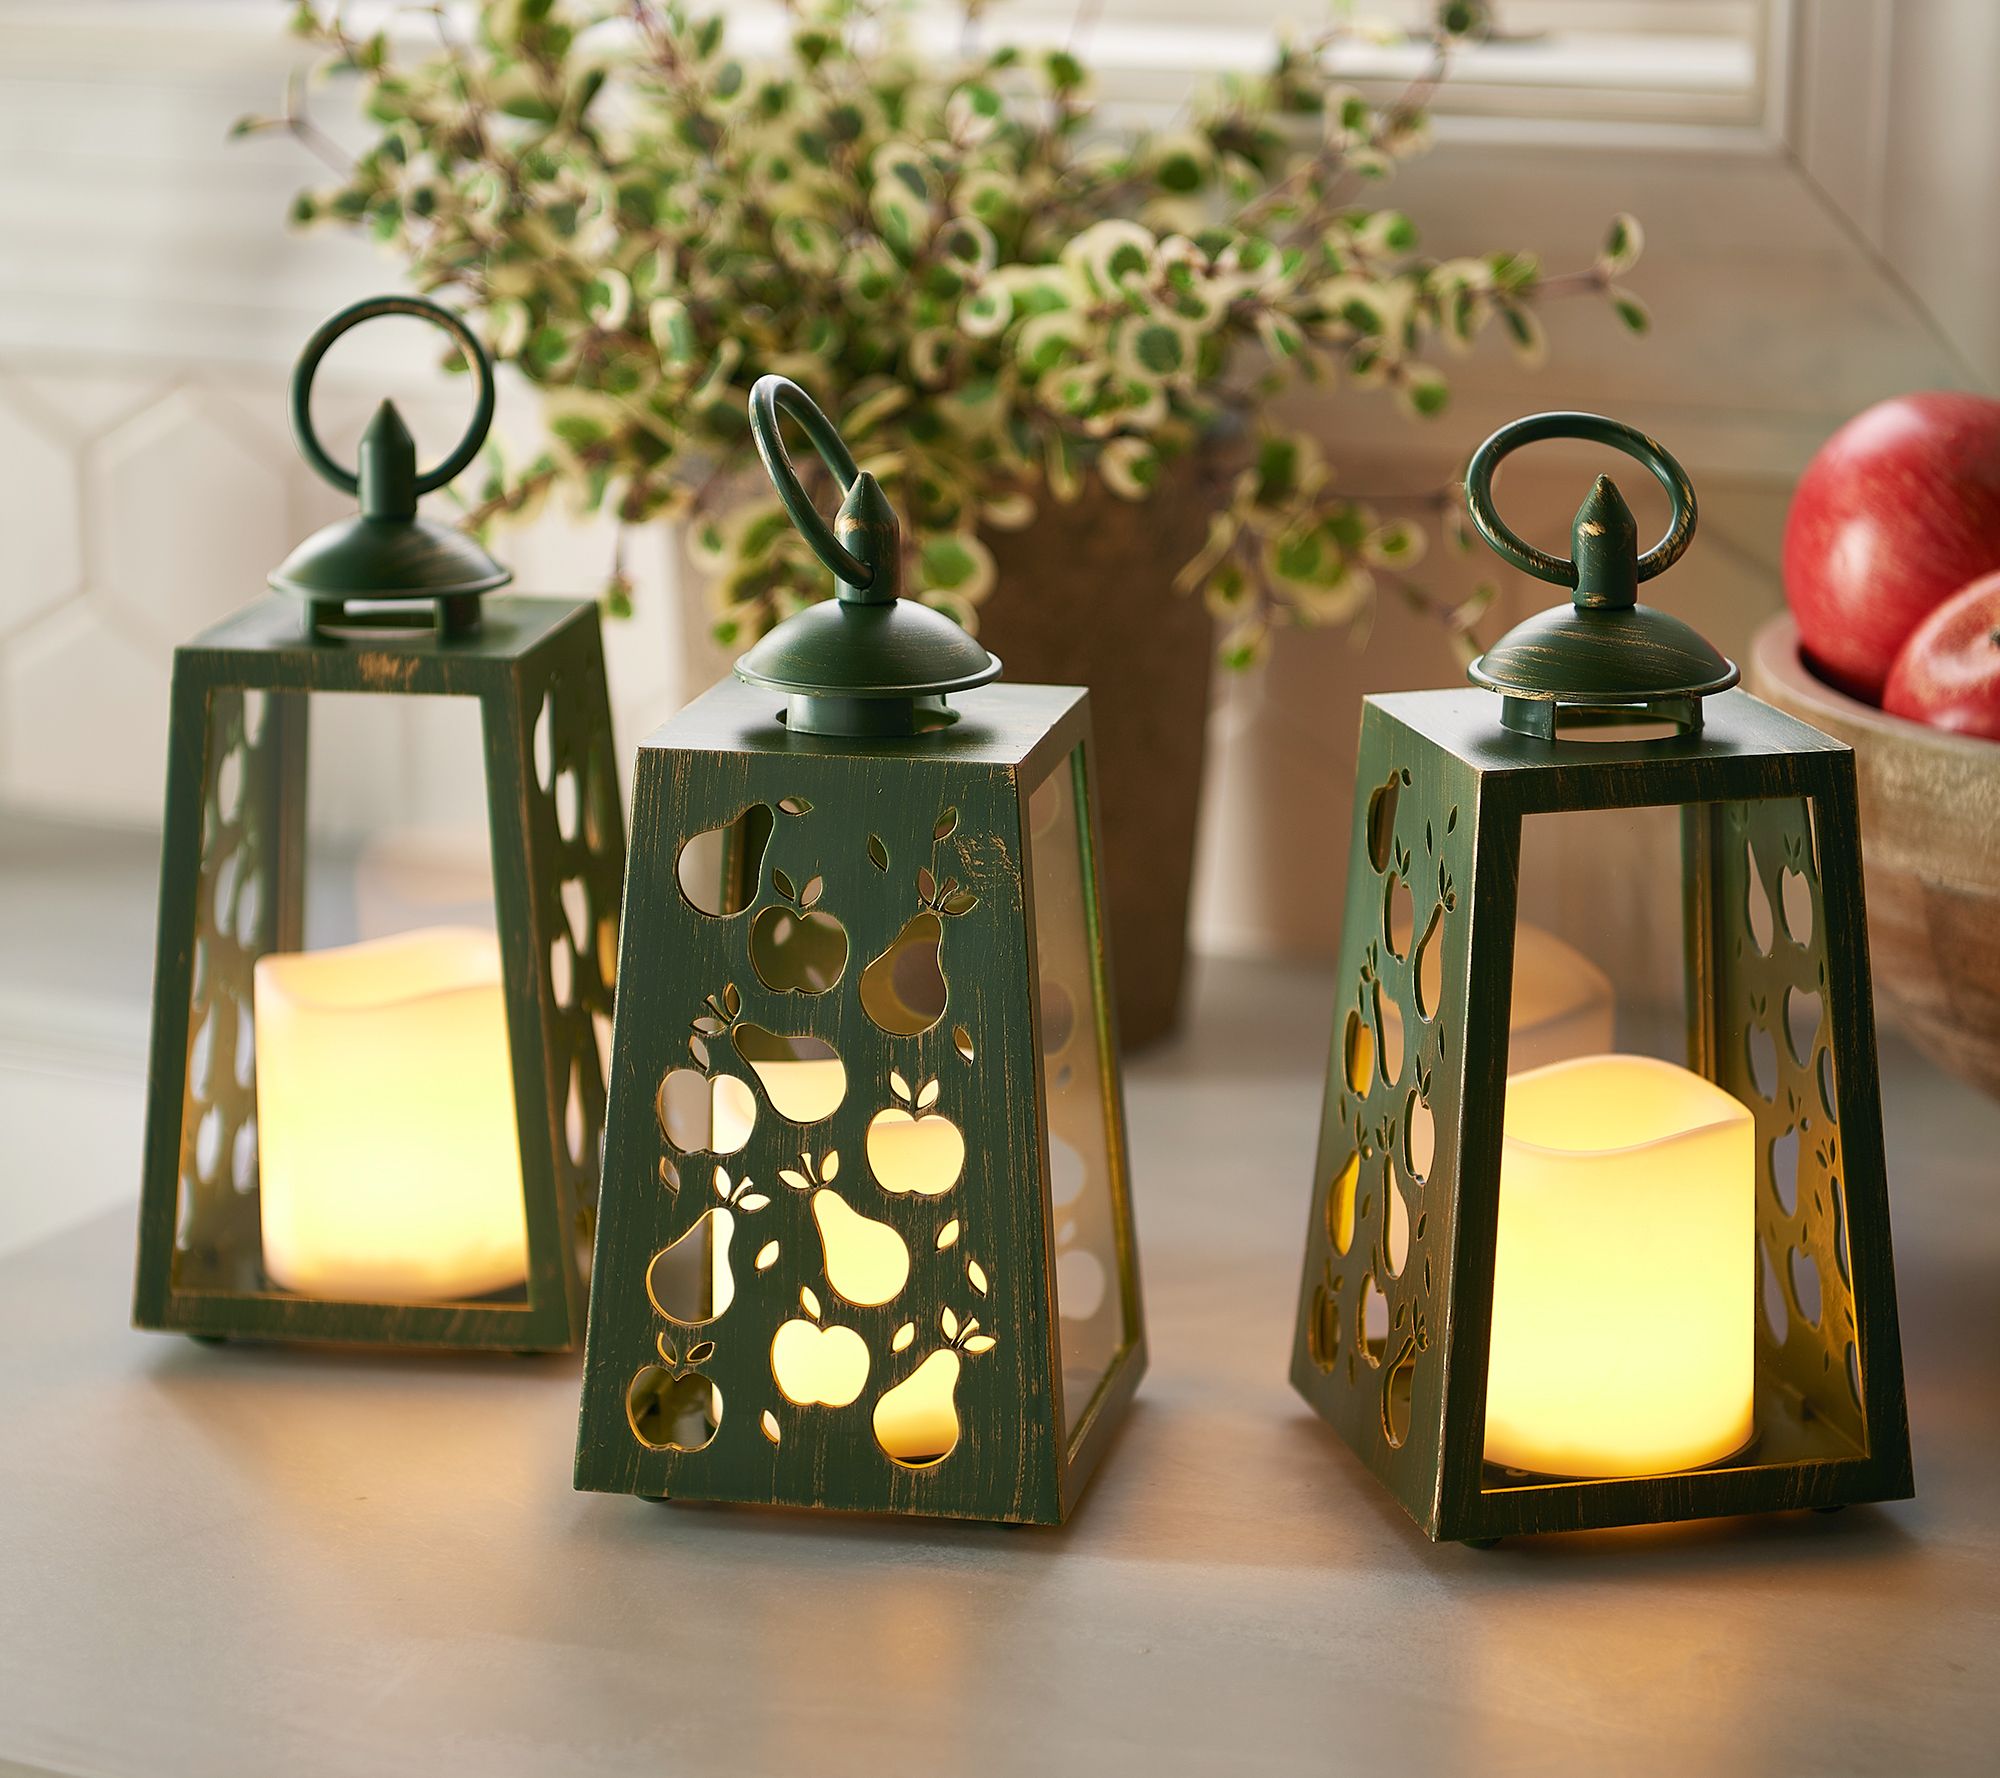 Candle Impressions Pears/Apples Lanterns